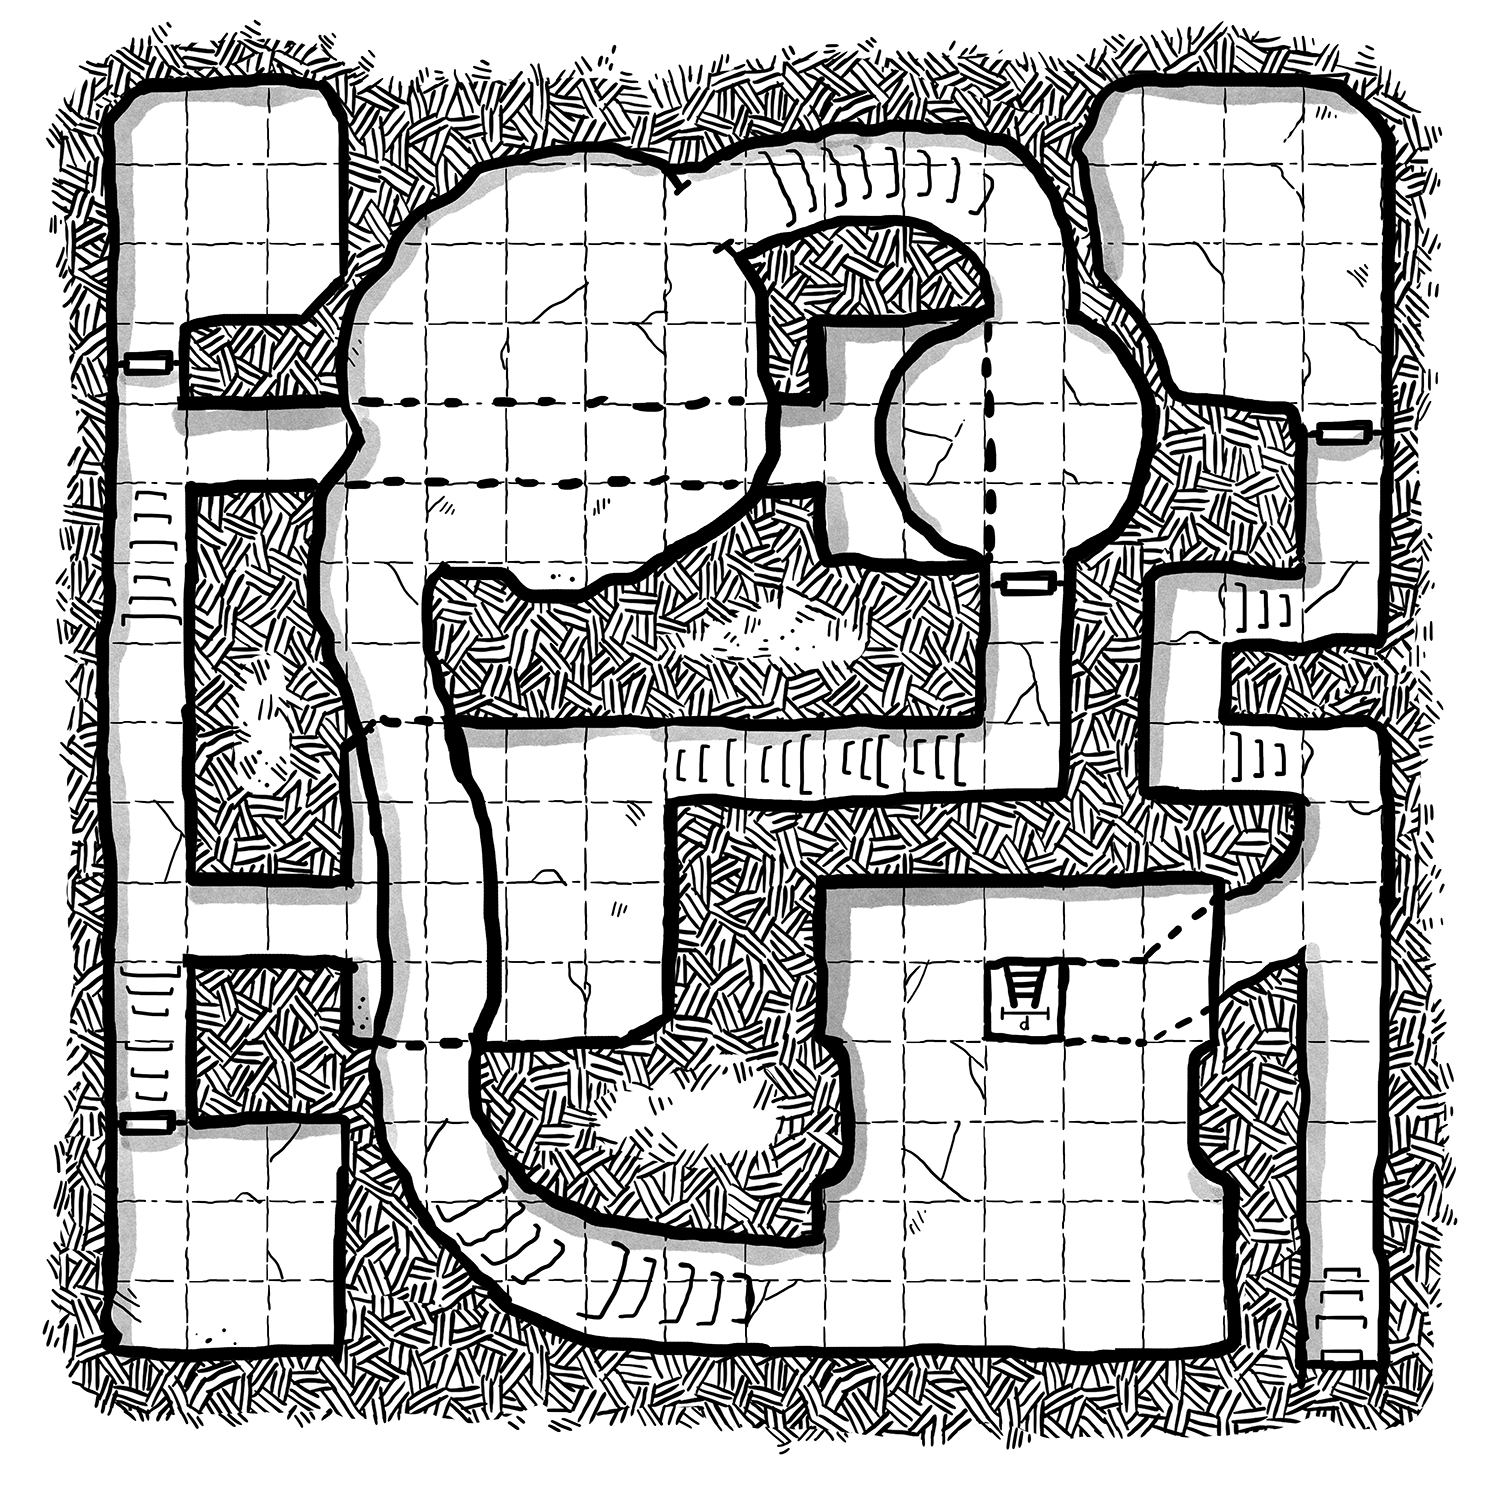 Dungeon Map by Fernando Salvaterra, from So You Want To Be a Game Master